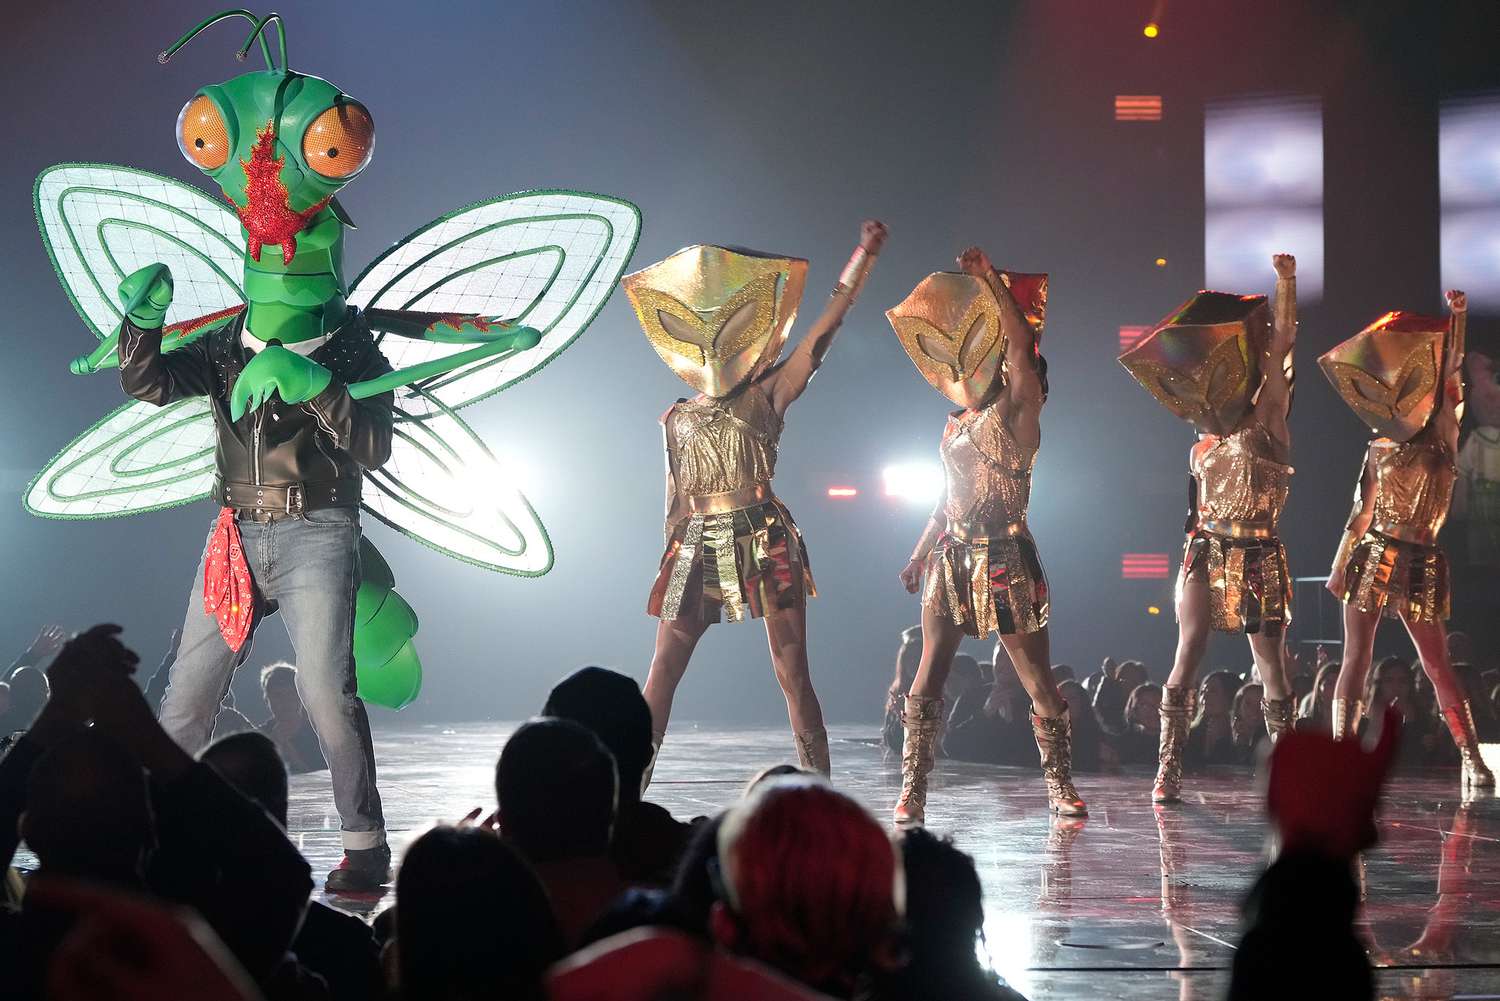 THE MASKED SINGER: Mantis in the “Battle of the Saved” episode of THE MASKED SINGER airing Wednesday, April 26 (8:00-9:01 PM ET/PT) on FOX.